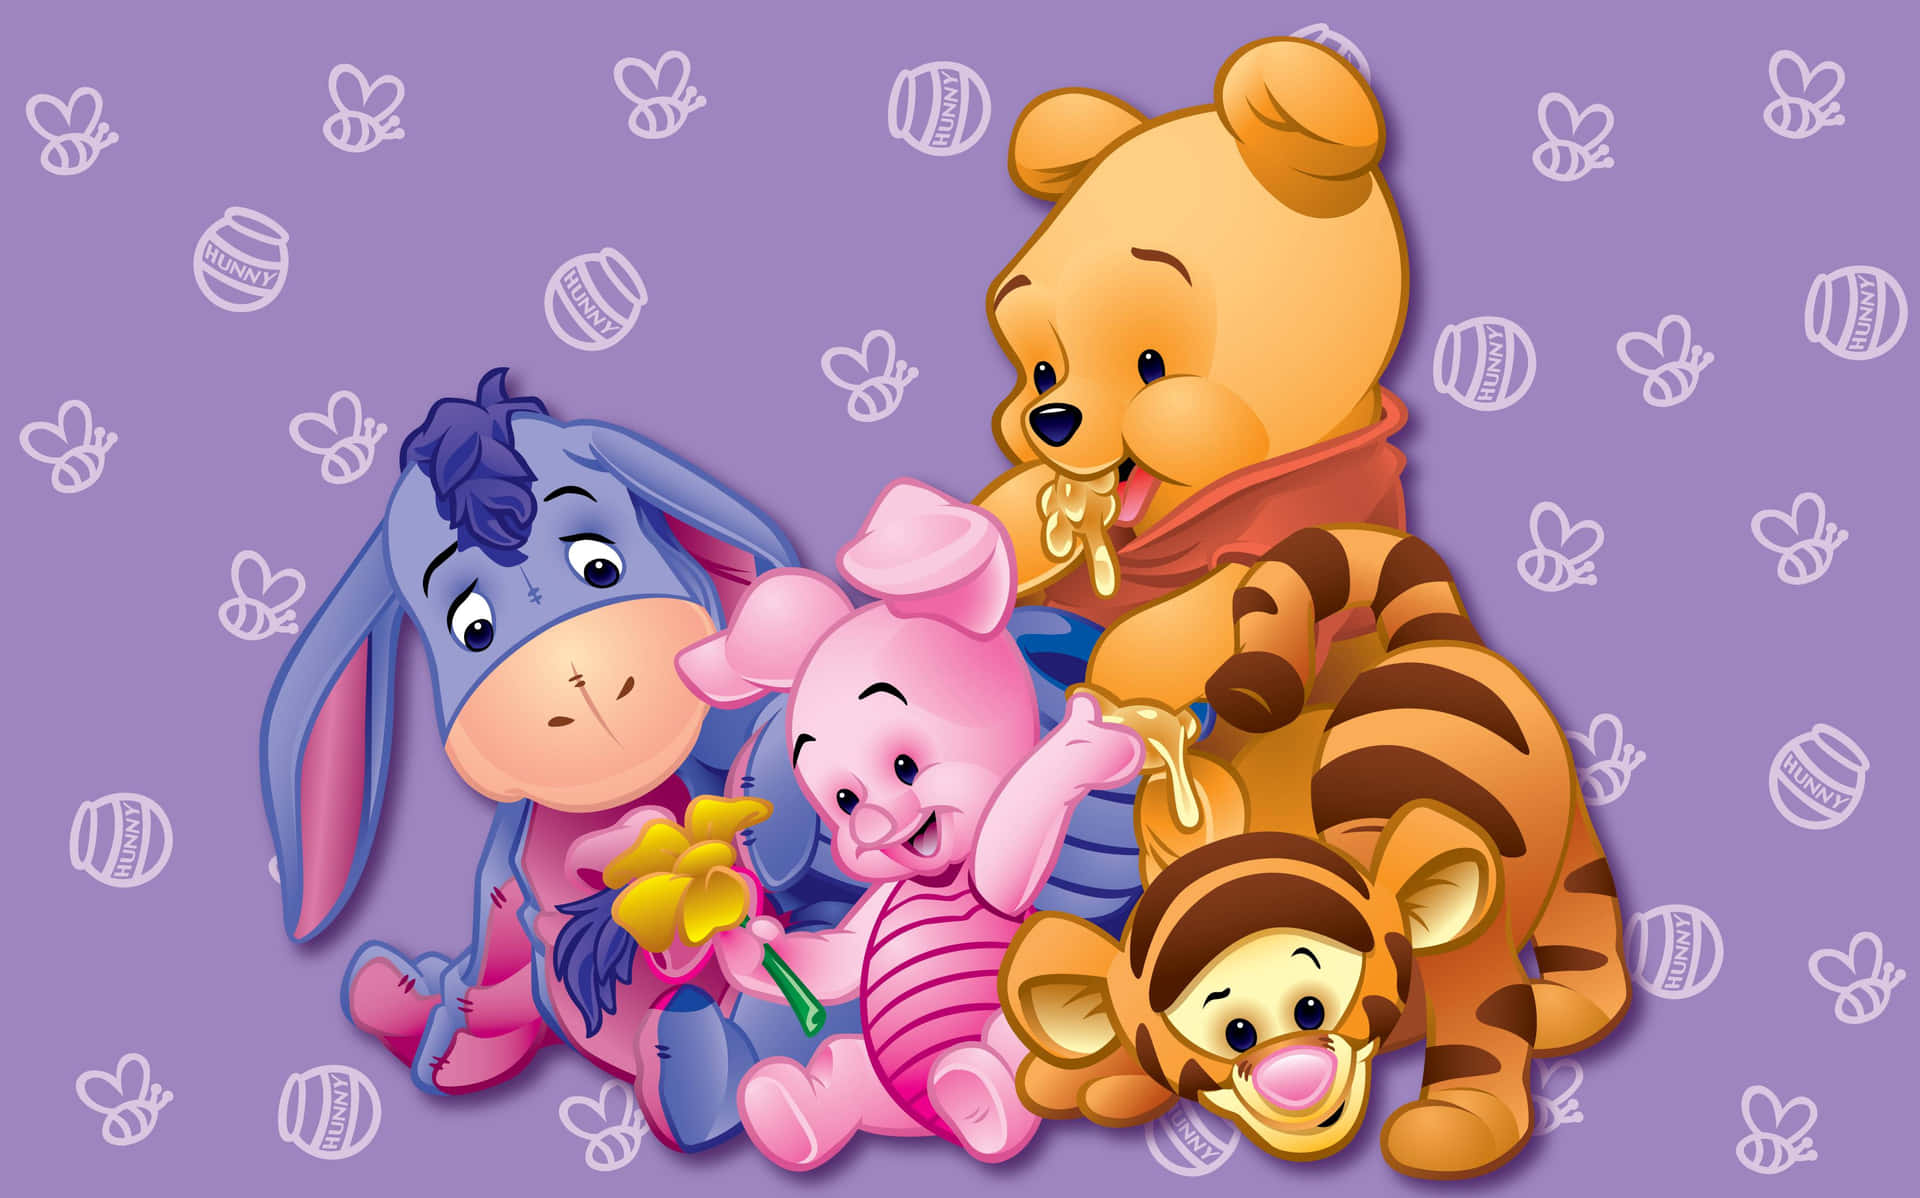 Enjoy The Classic Disney Characters Of Winnie The Pooh, Eeyore And Tigger Having Some Fun In The Hundred Acre Wood!